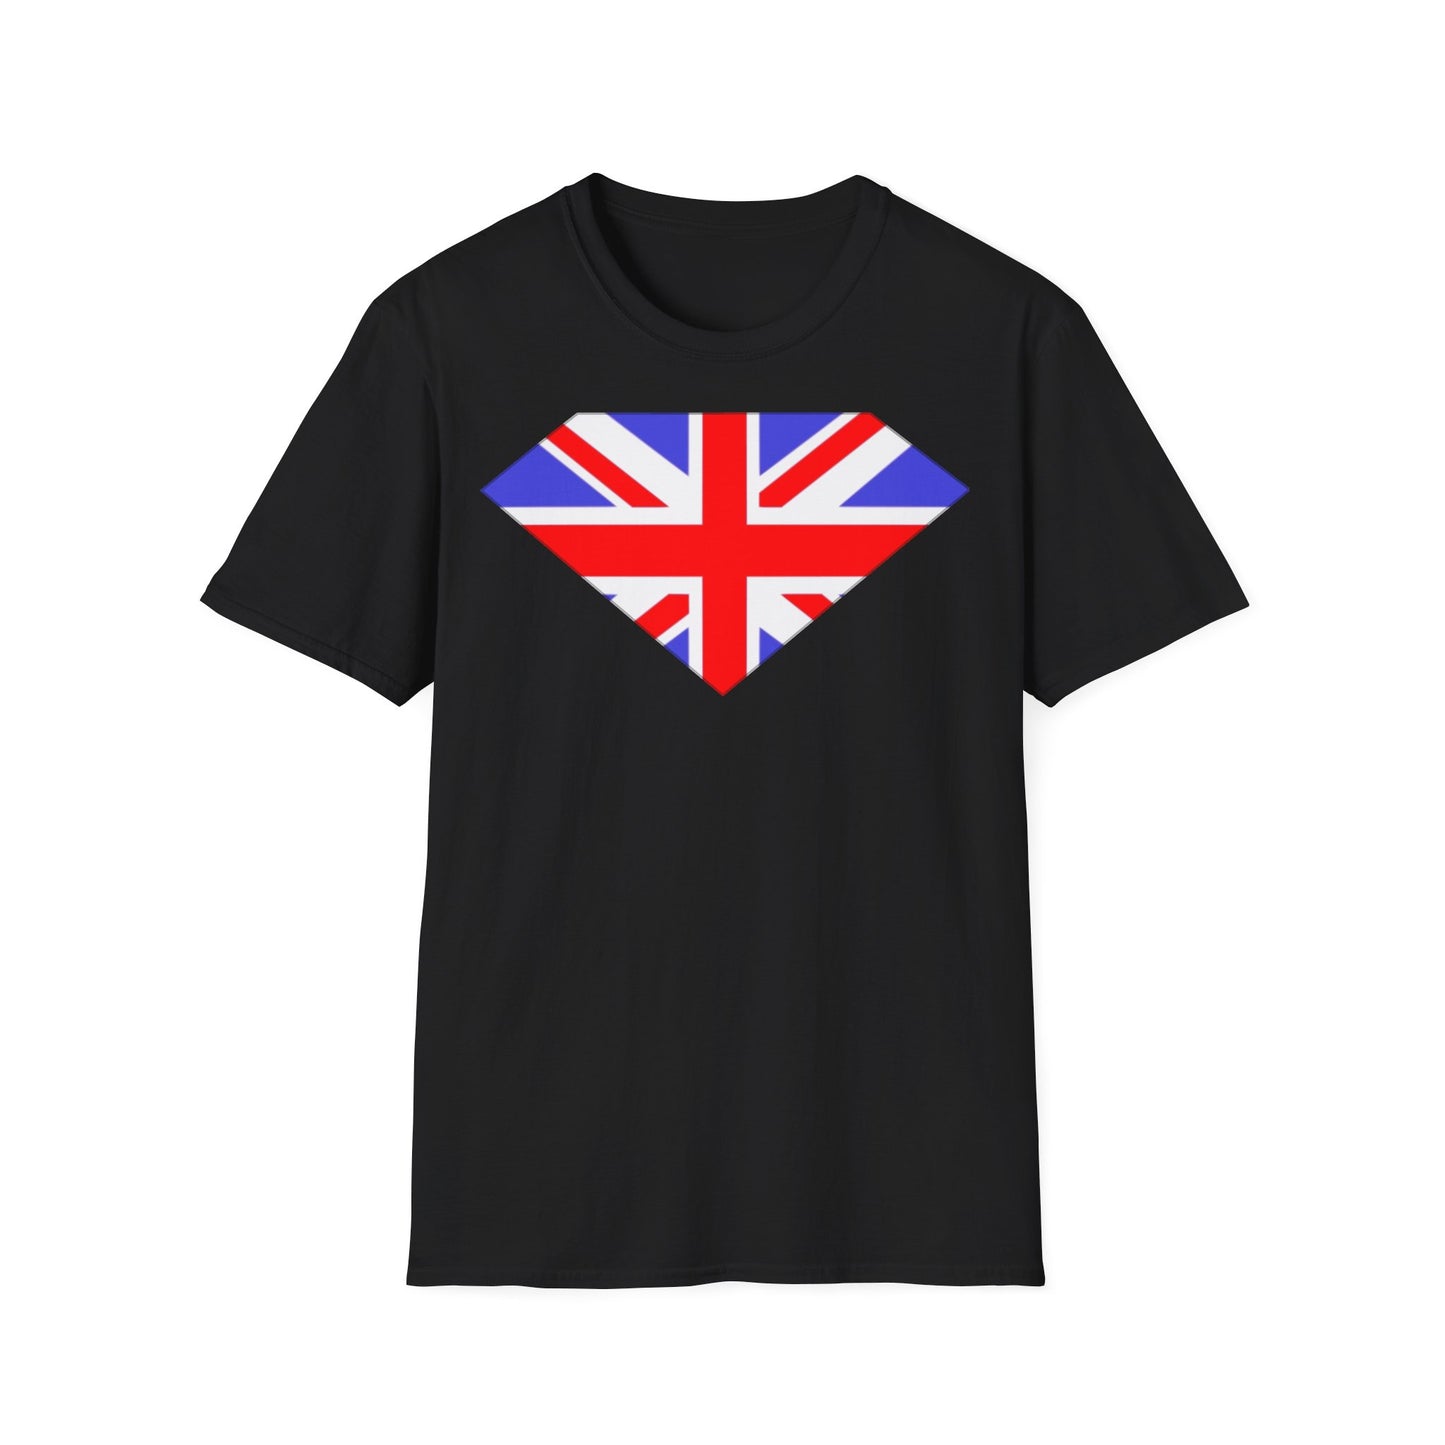 A black t-shirt with a design of a Union Jack flag in the shape of a flat top diamond gemstone